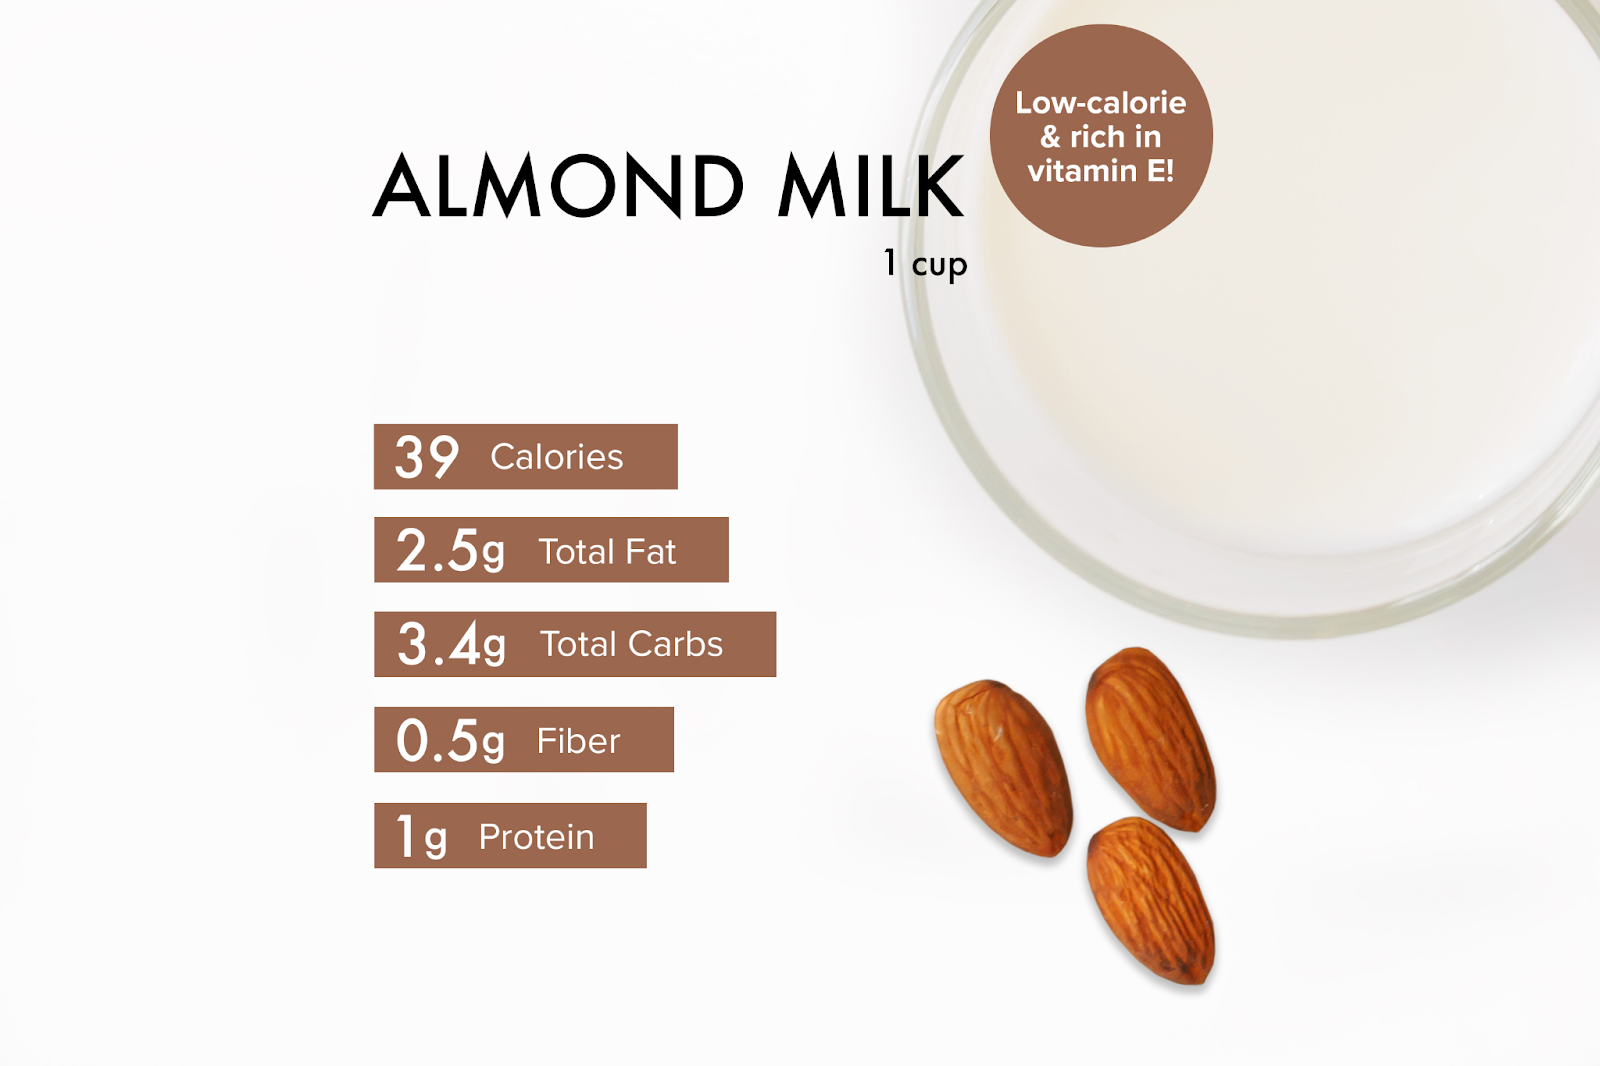 Nutritional content of almond milk for 1 cup